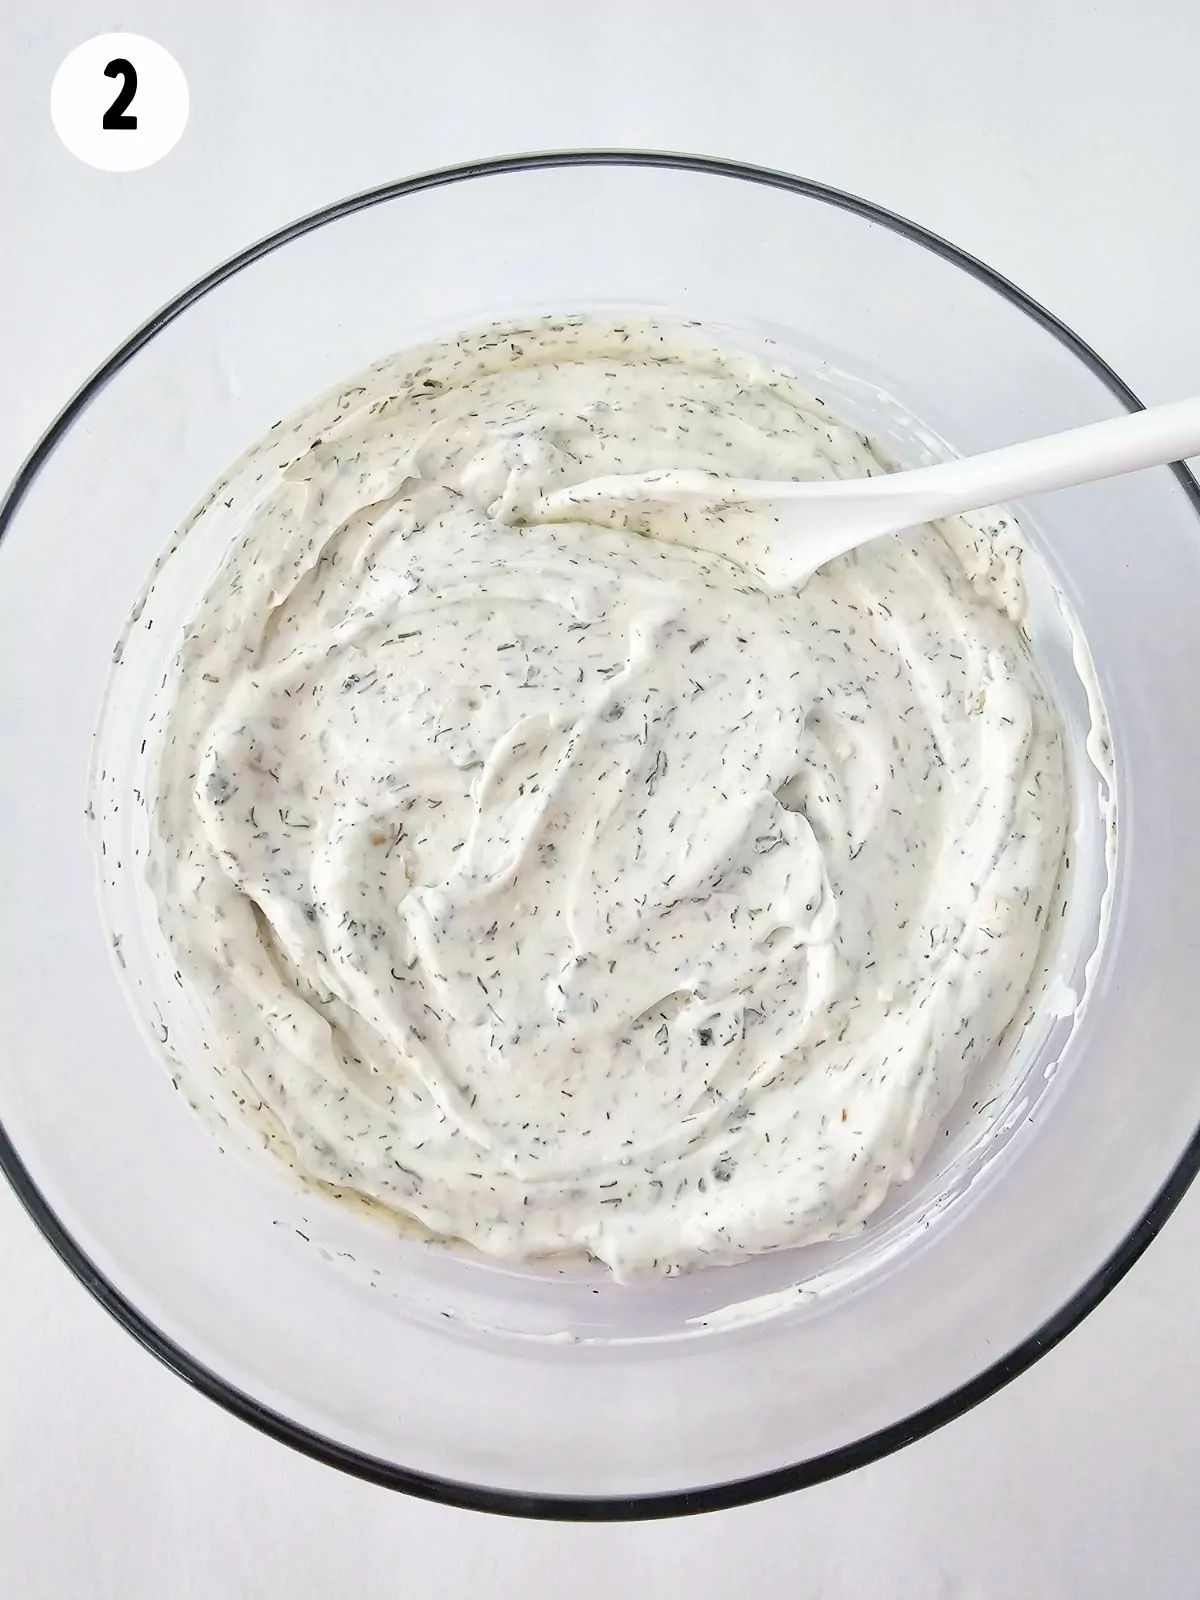 Dill Dip in bowl with spoon.